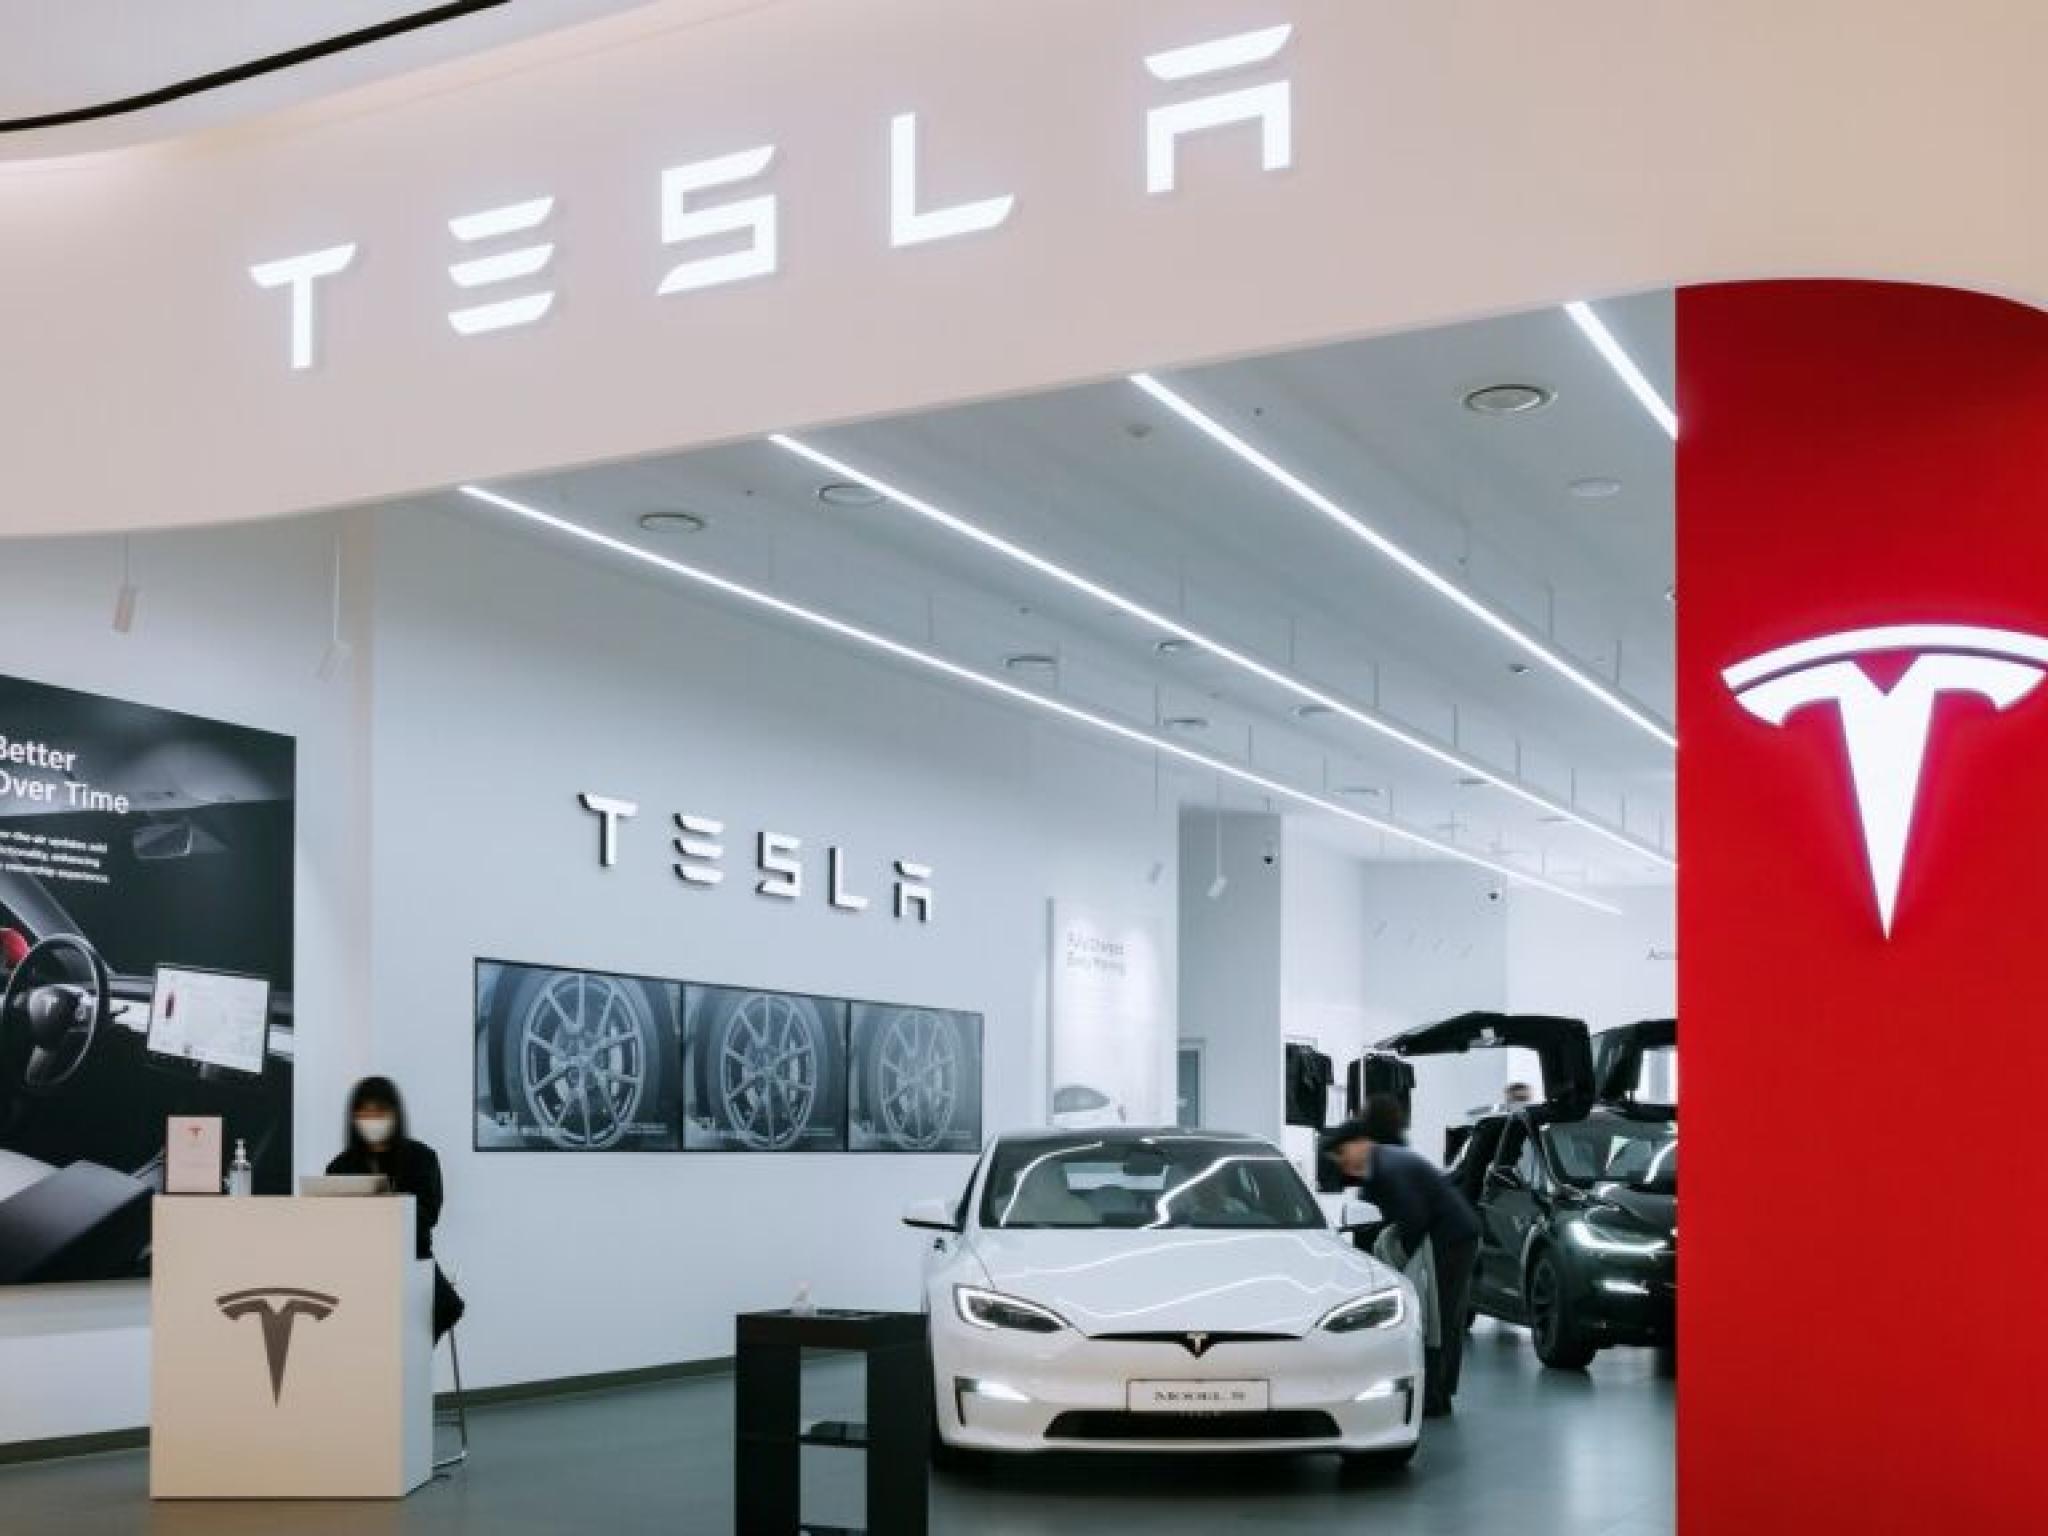  as-tesla-stock-reels-after-a-rough-week-following-earnings-top-analyst-defends-elon-musks-ambitions-for-ev-giant-beyond-cars-investors-should-not-overlook-teslas-other-plays 